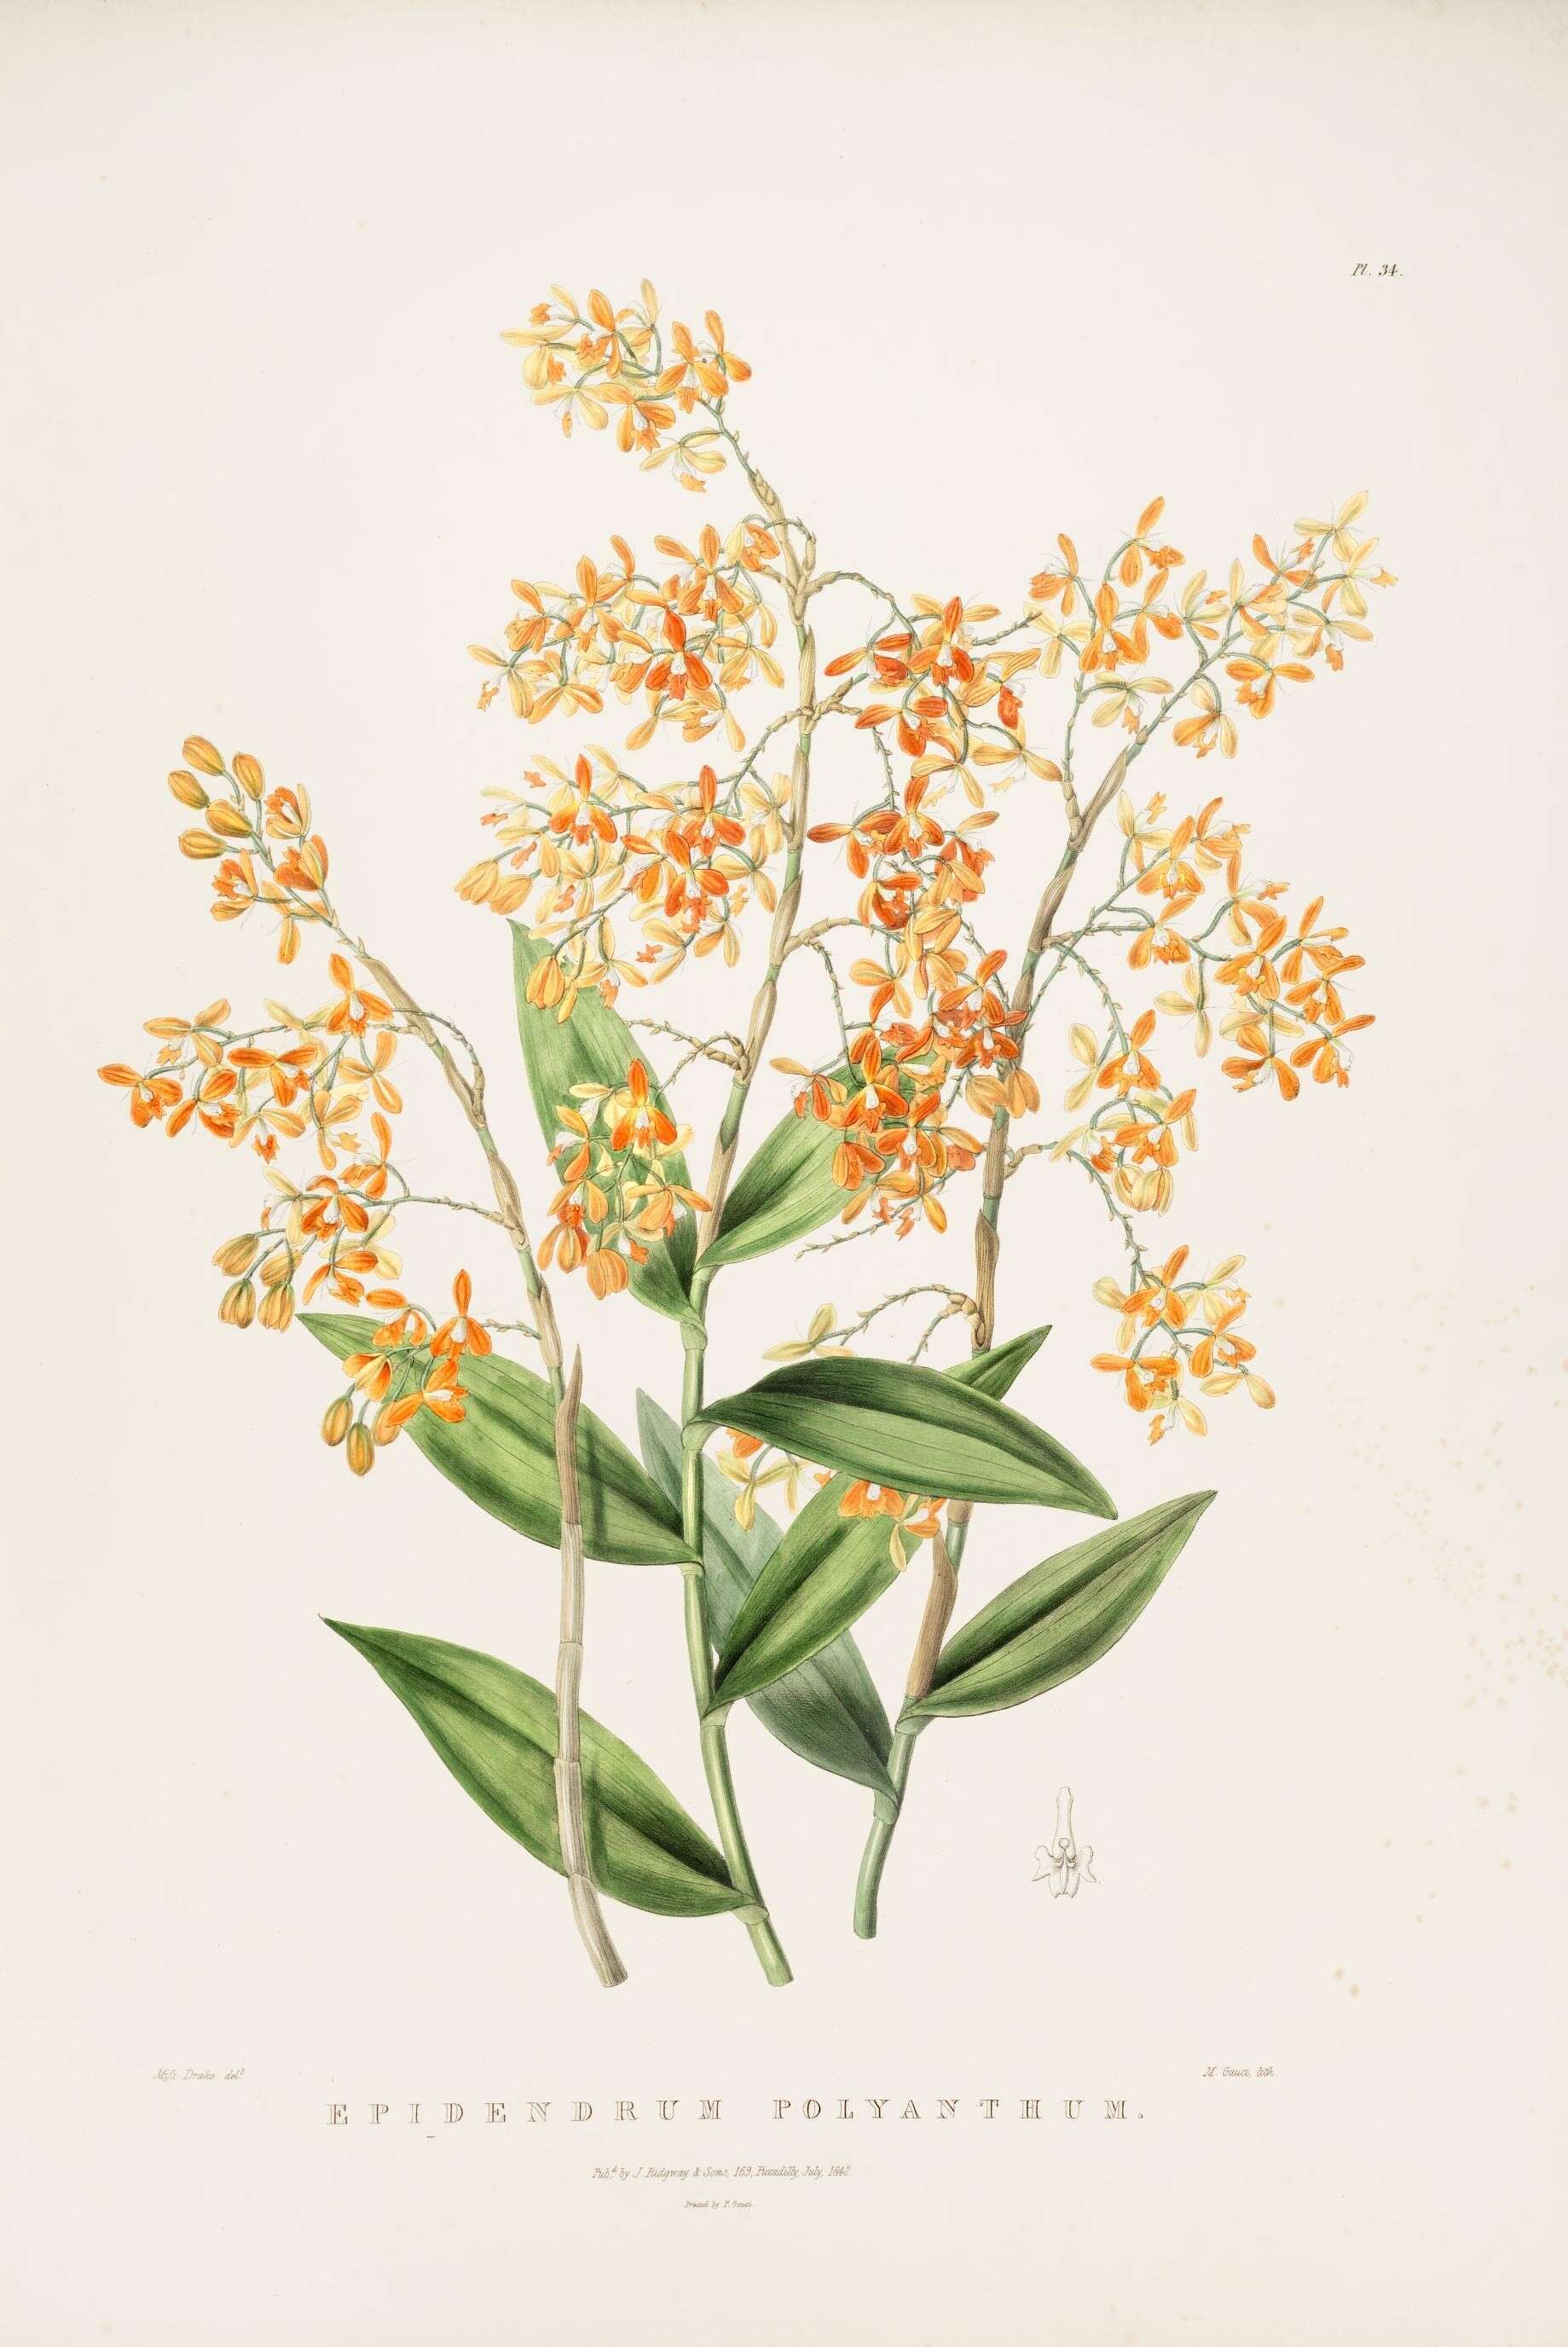 Image of Star orchids